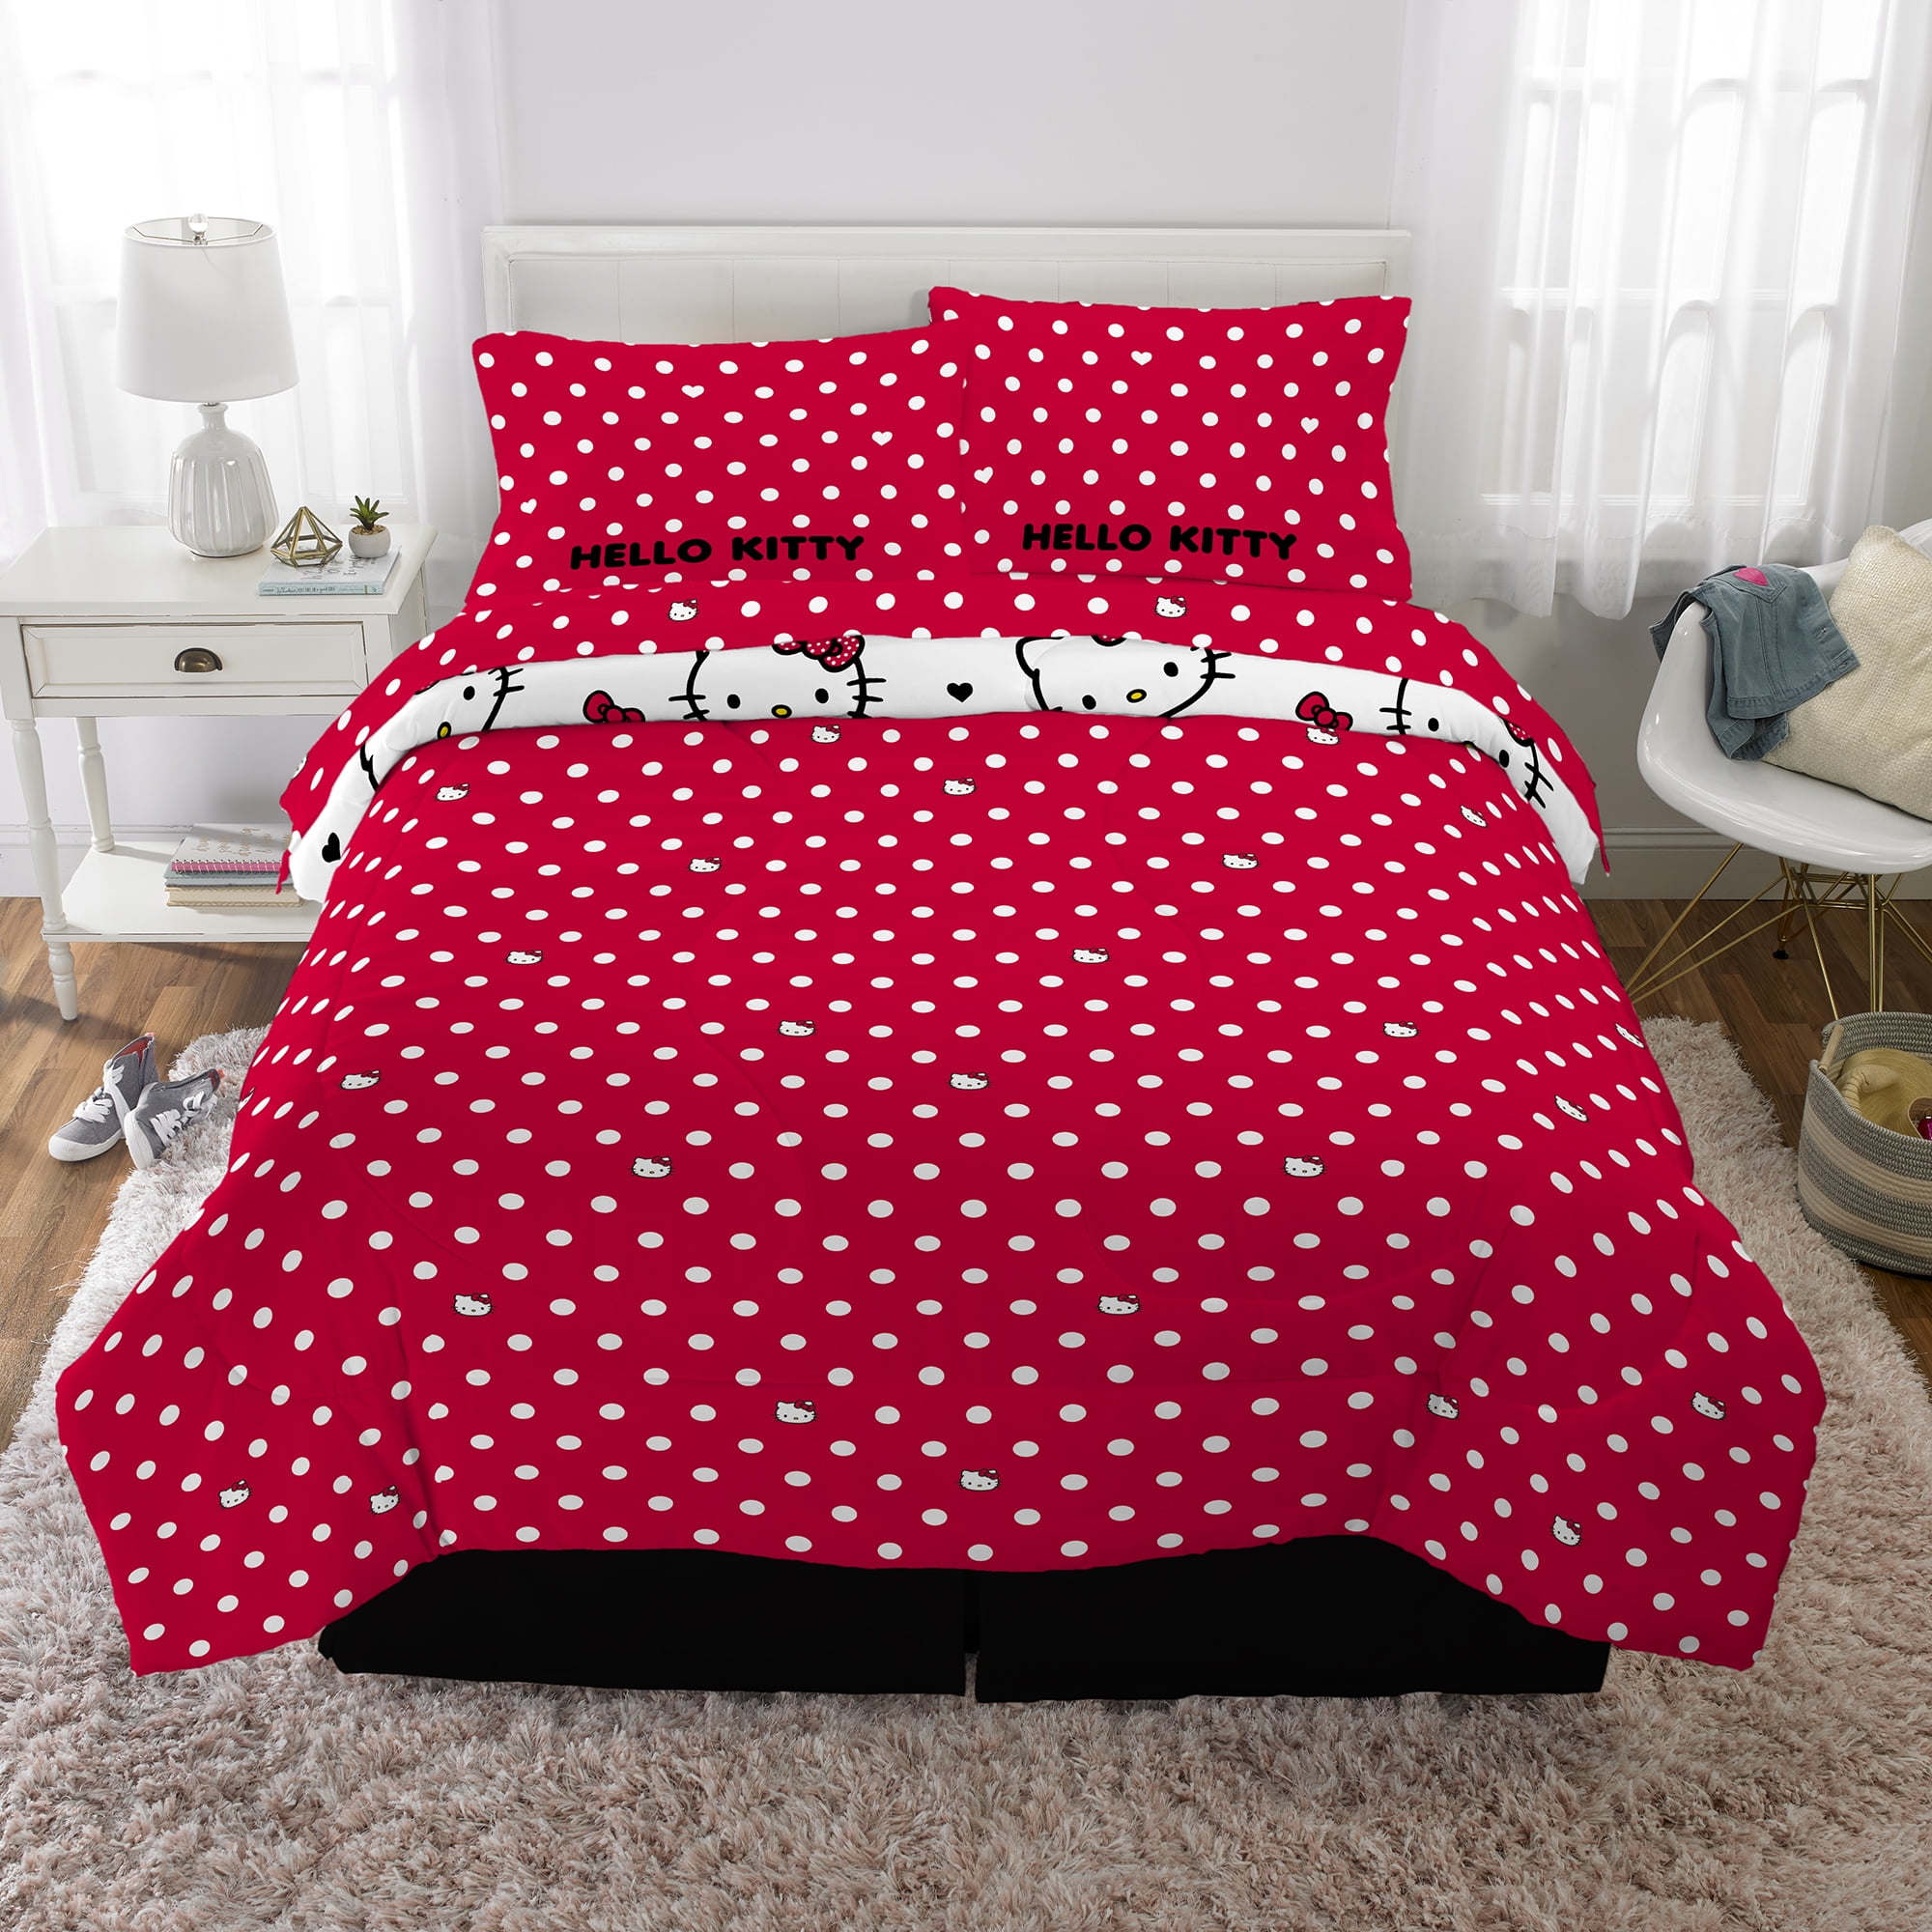 Hello Kitty Cotton Comforter Bedding Sets Queen Home Ptinted